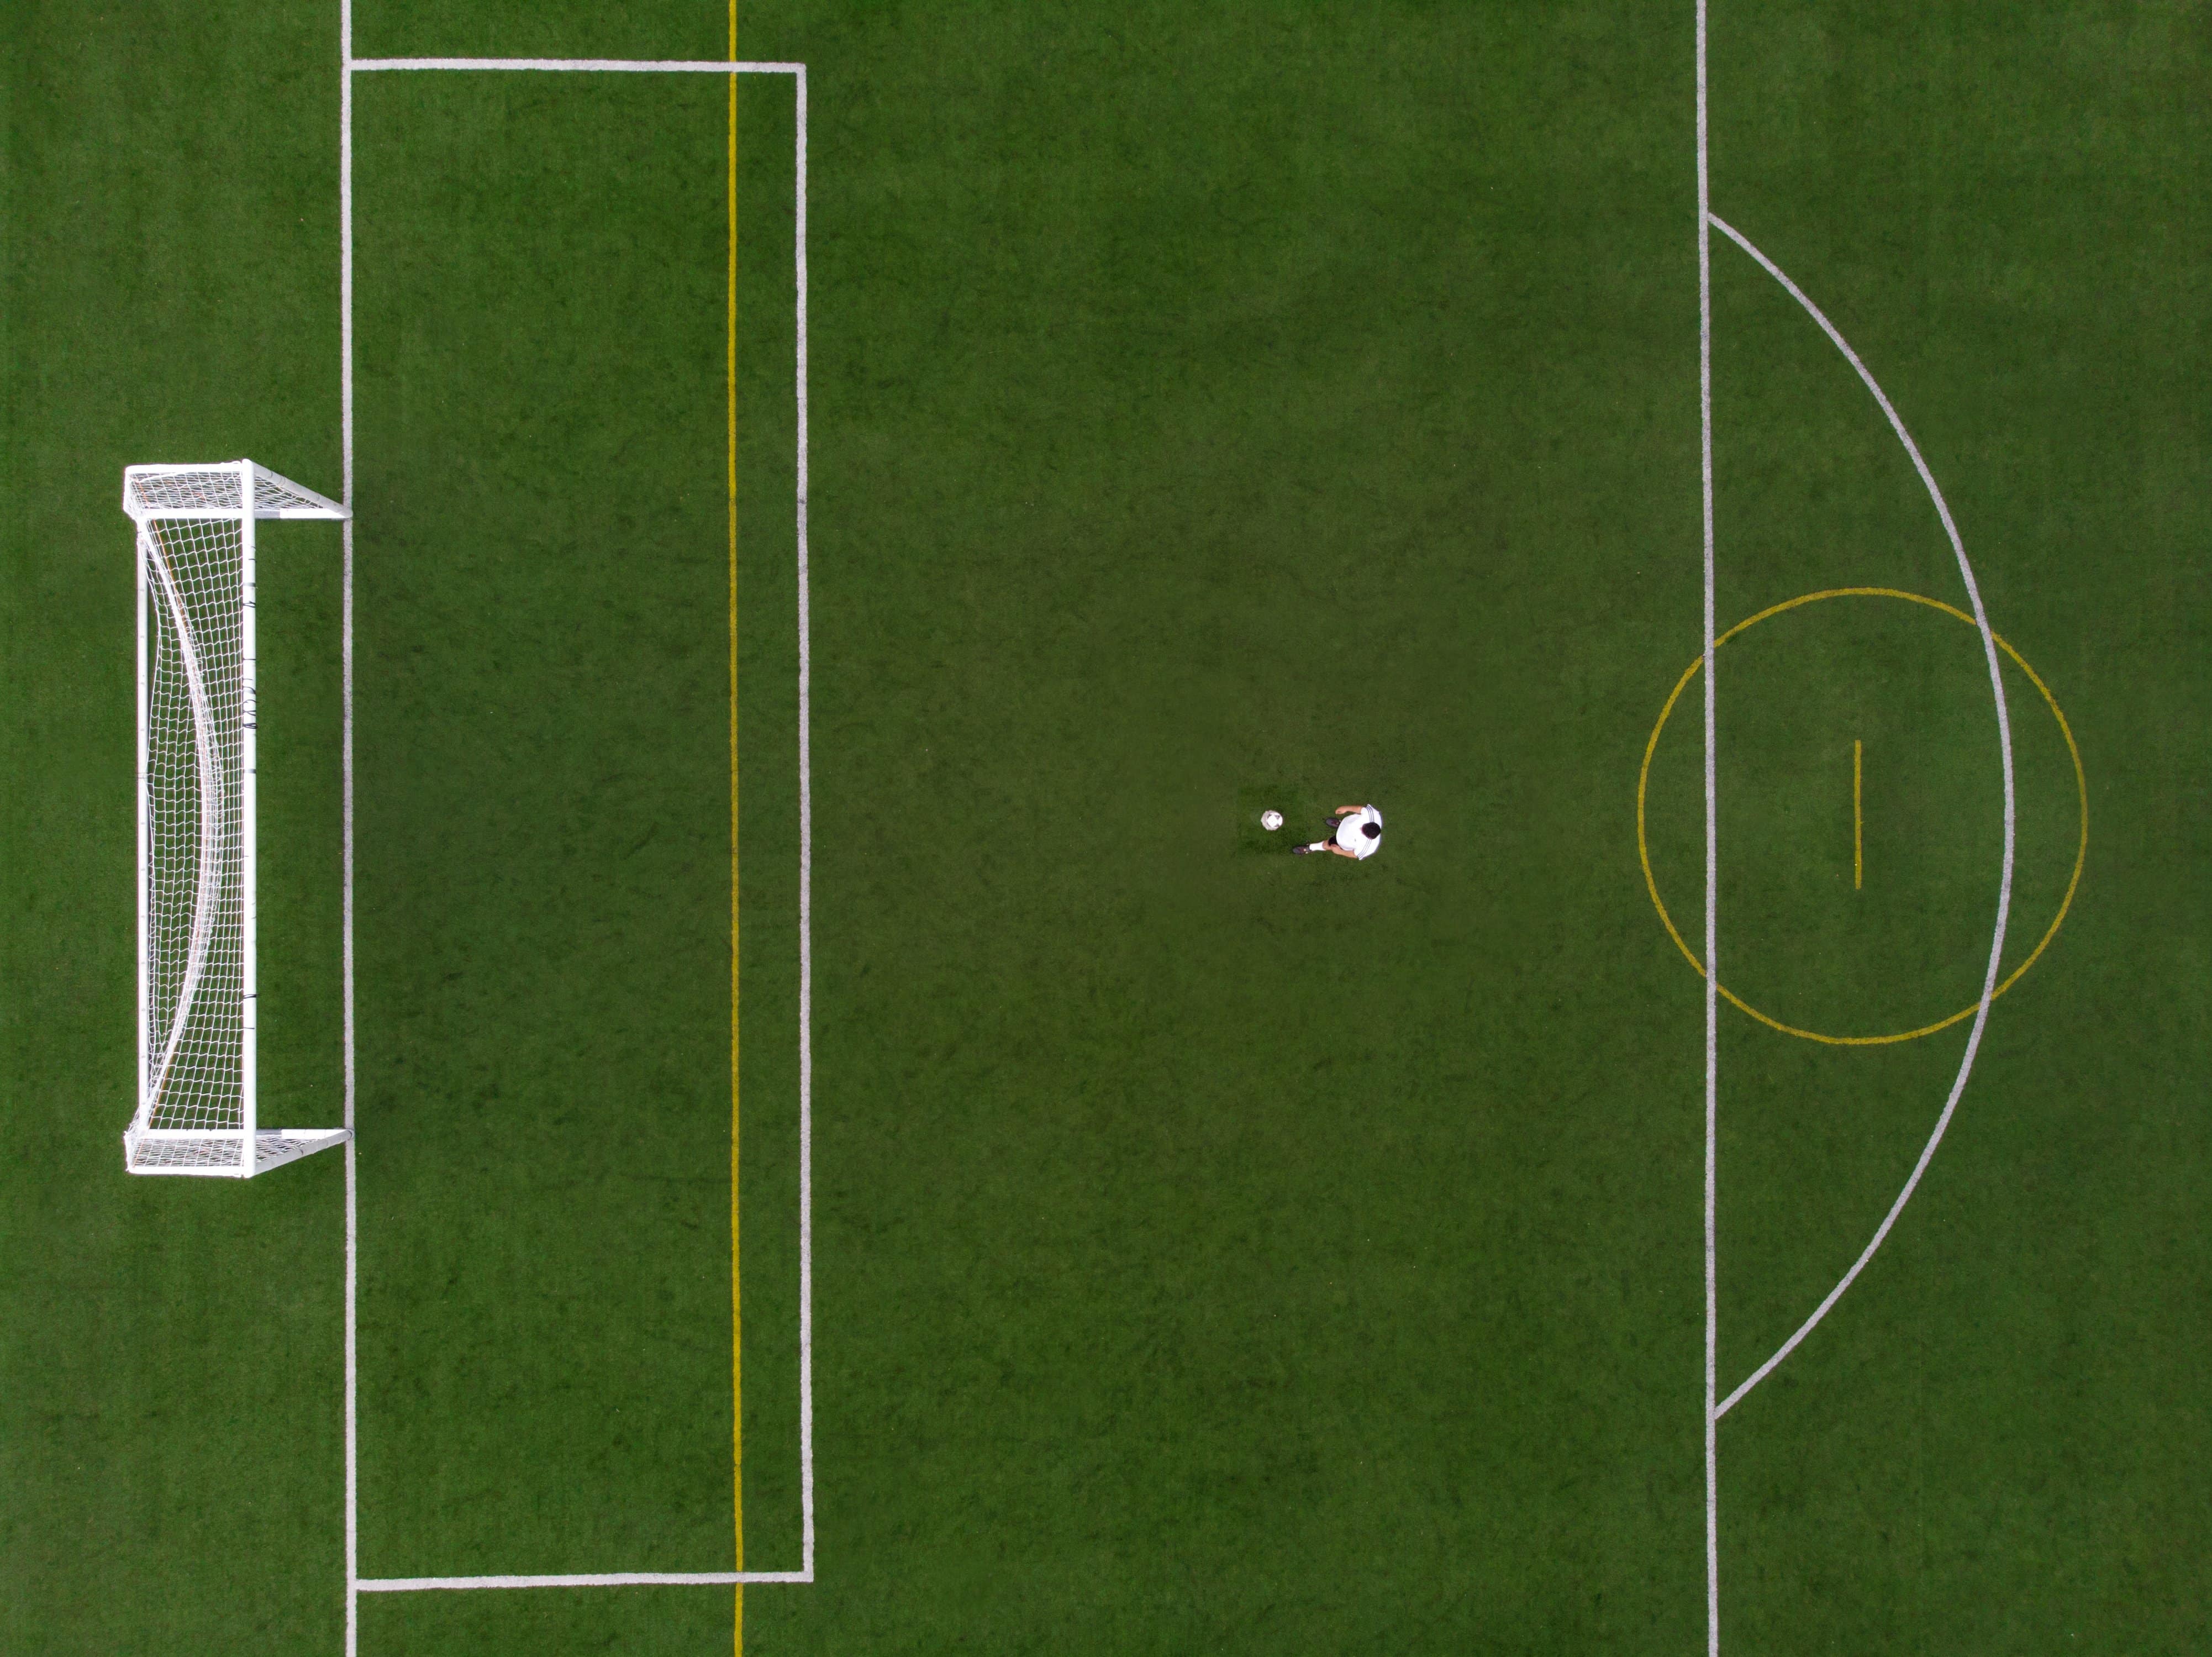 Overhead view of soccer field with player standing in front of the penalty box.